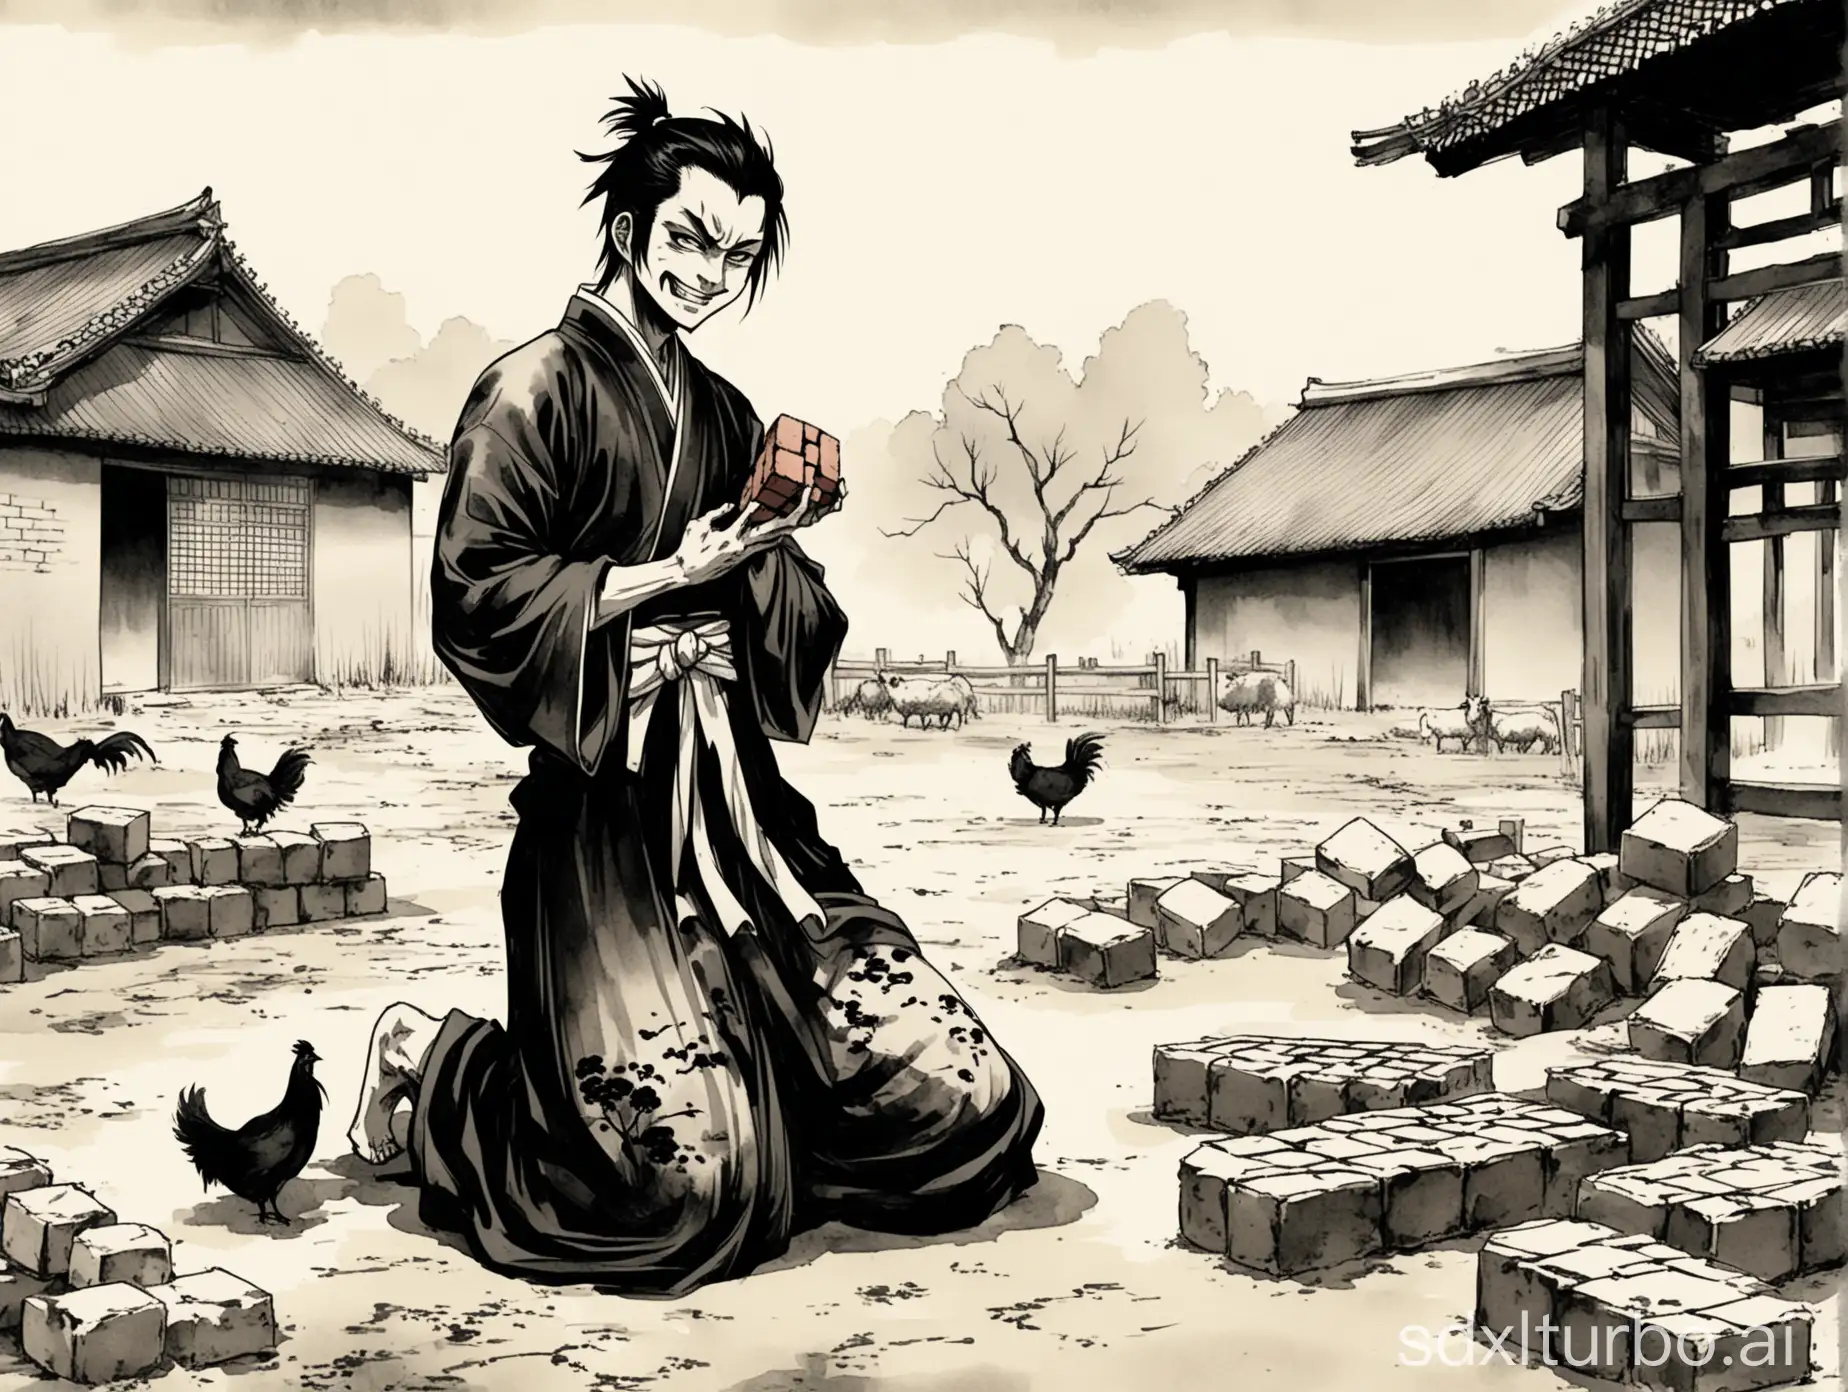 Mischievous-Boy-with-Brick-in-Hand-Traditional-Chinese-Ink-Painting-Style-Scene